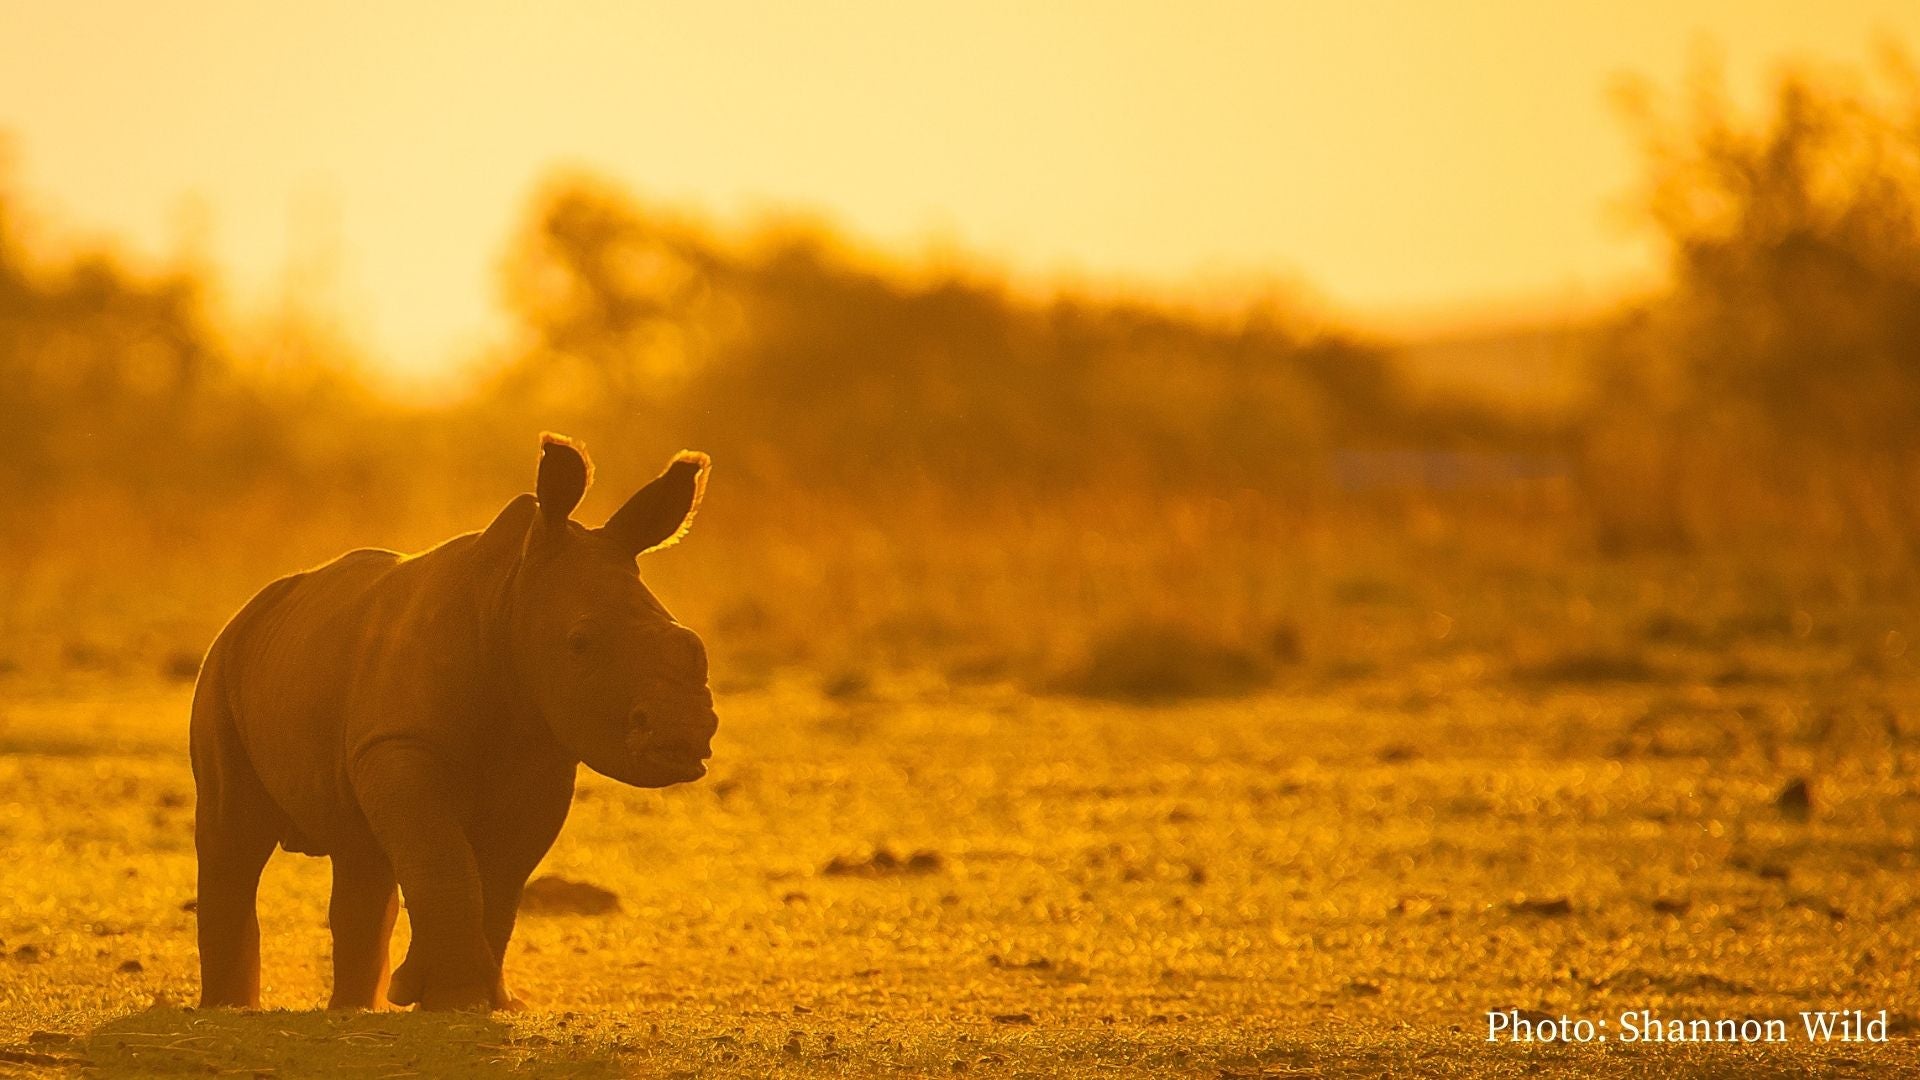 Rhinos of Africa: Threats, Conservation And Those We Support